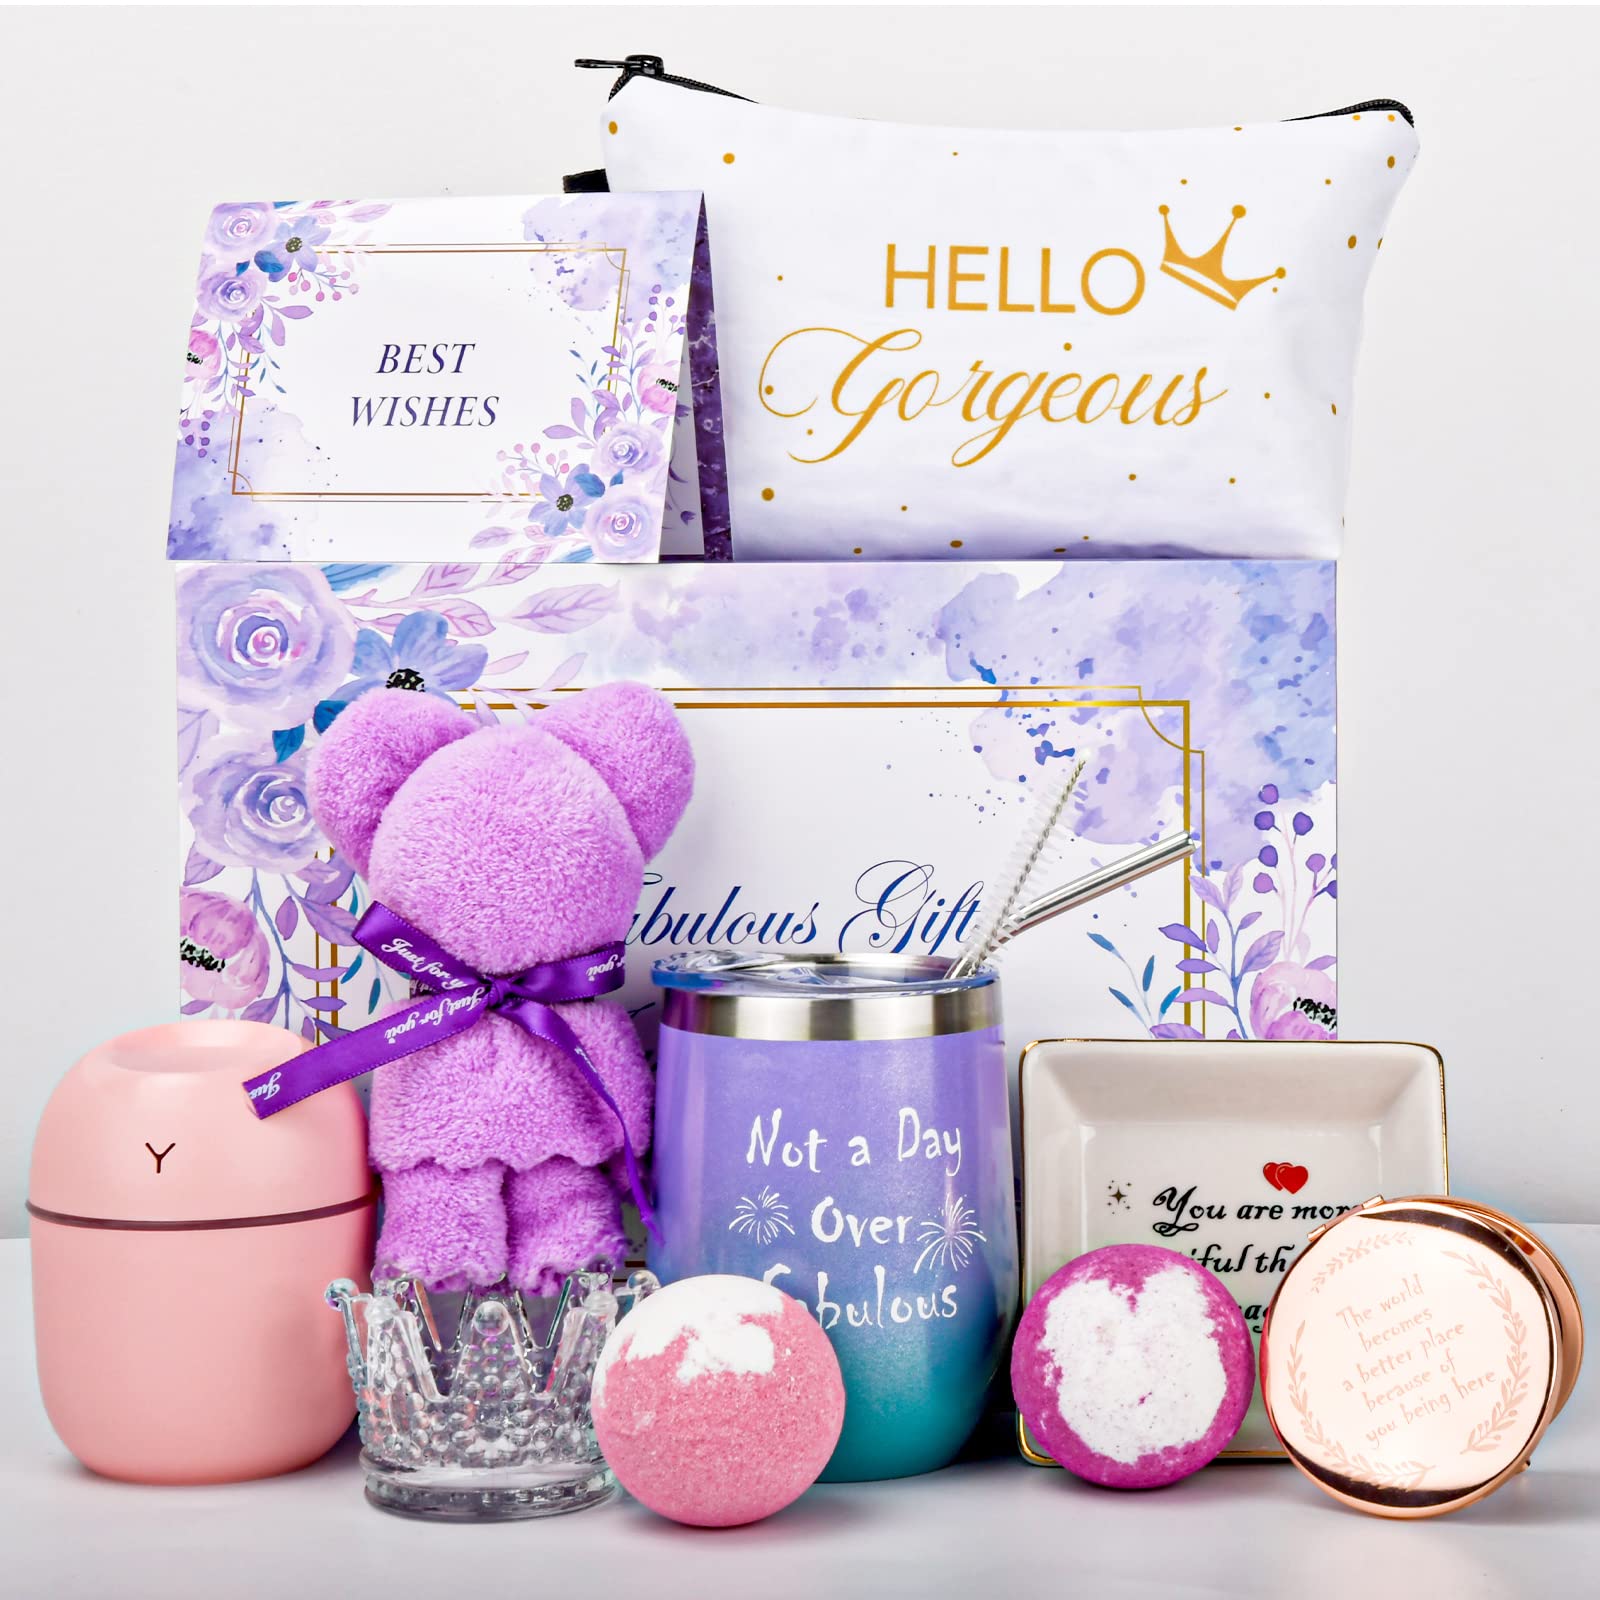 Birthday Gifts for Women,Unique Happy Birthday Relaxing Spa Bath Set Gift  Baskets Ideas for Her, Mom, Sister, Friends,Get Well Soon Gifts for